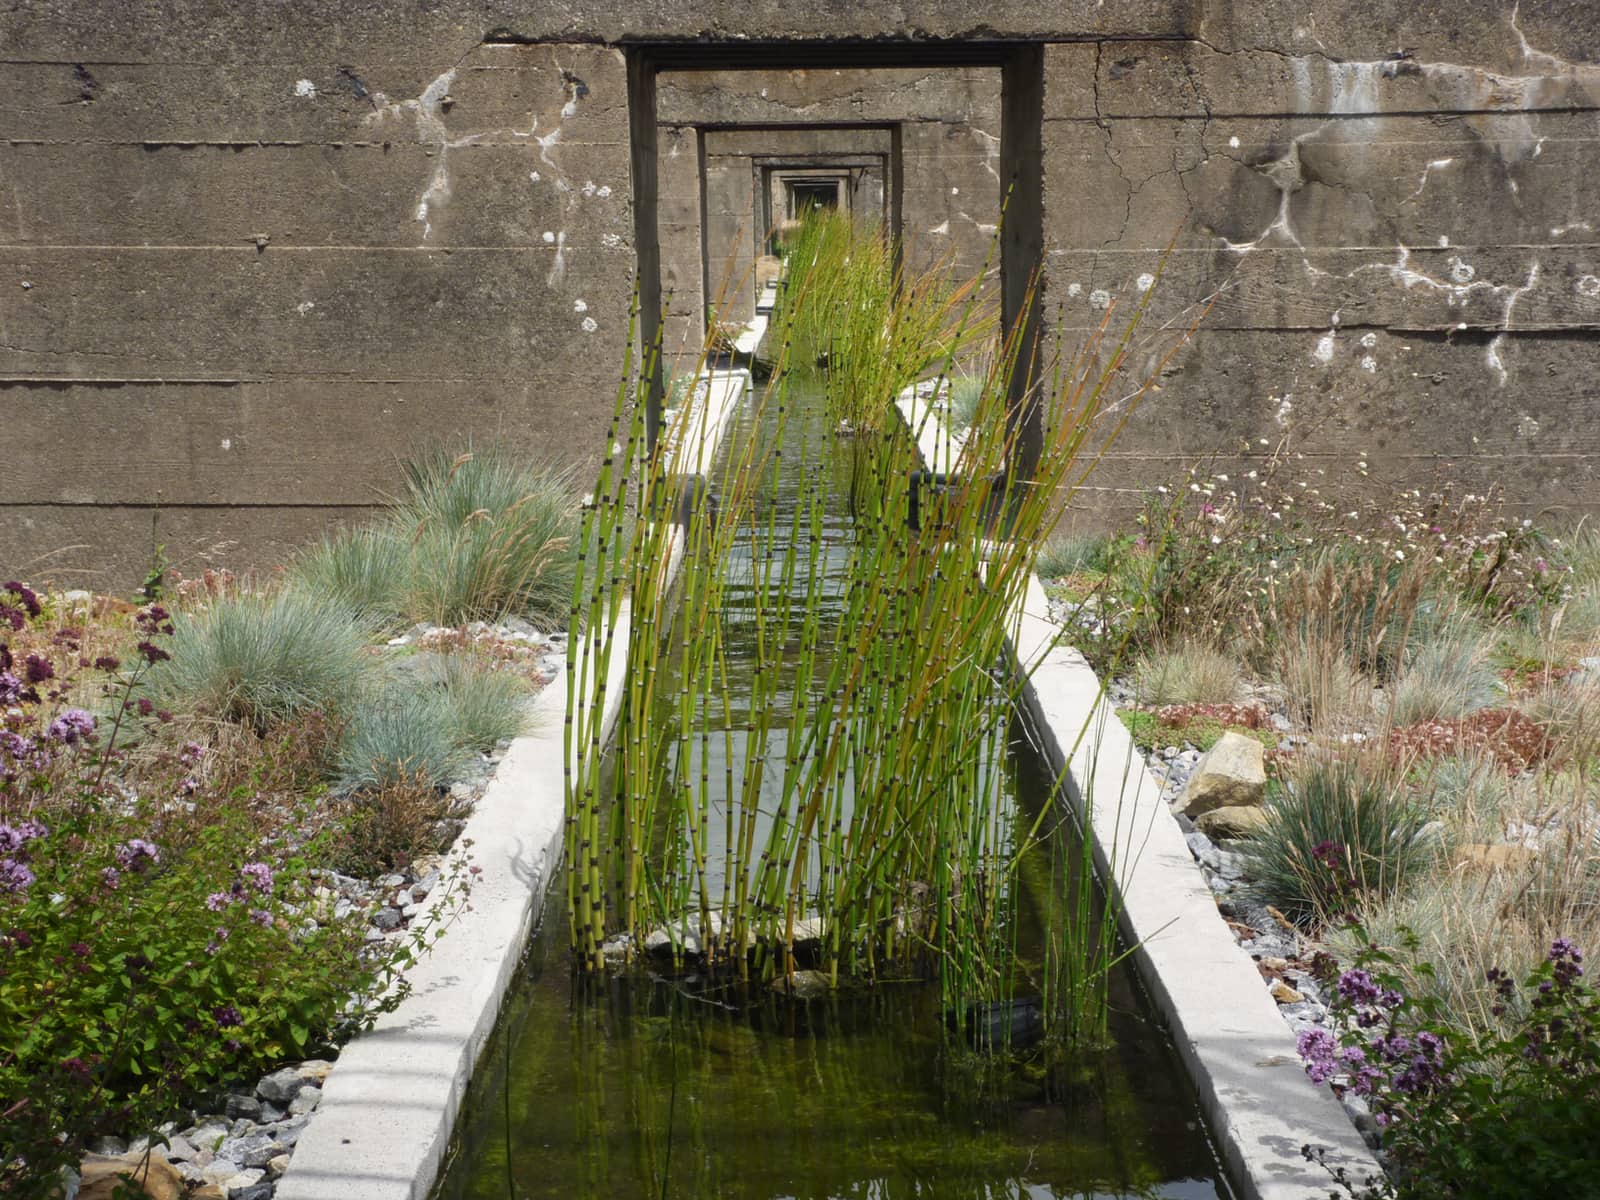 Gardens of Interstitial Wildness: Cultivating Indeterminacy in the Metropolitan Landscape